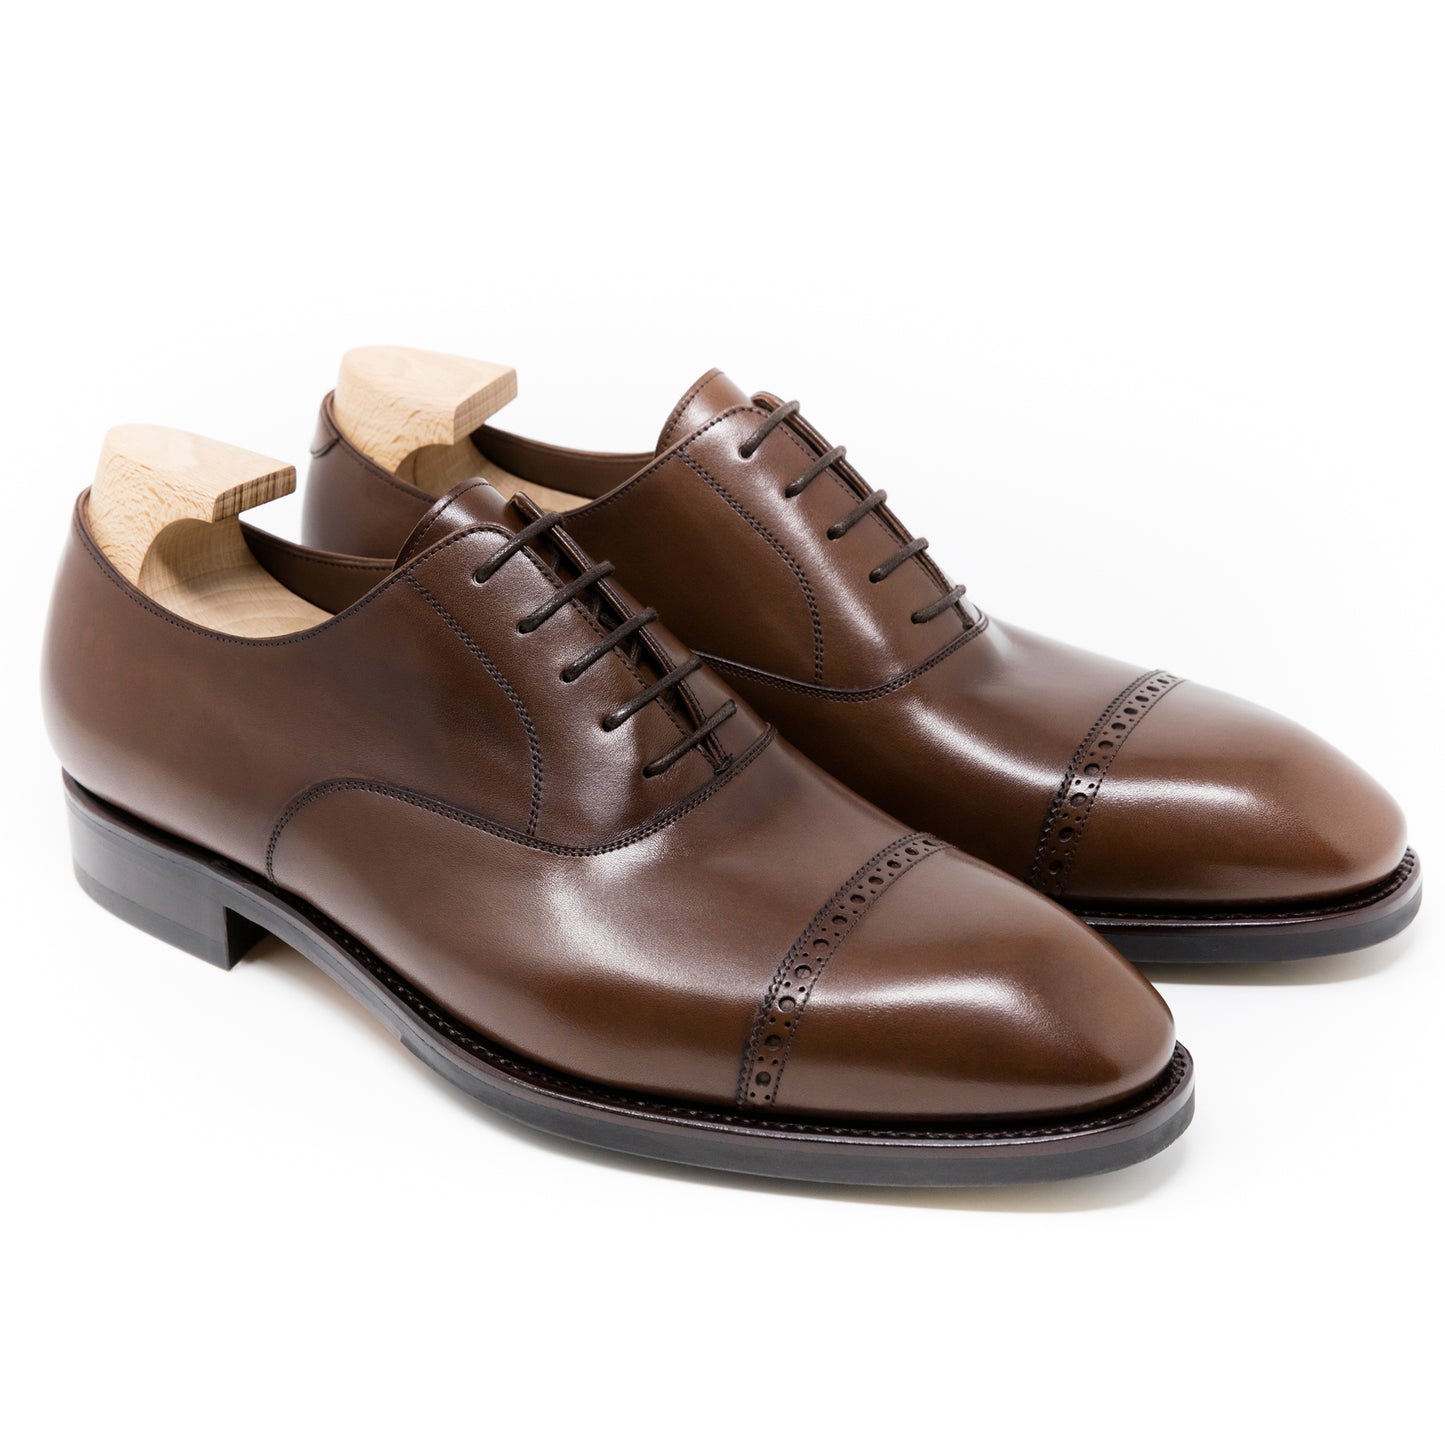 TLB Mallorca leather shoes 503 / ALAN / VEGANO BROWN